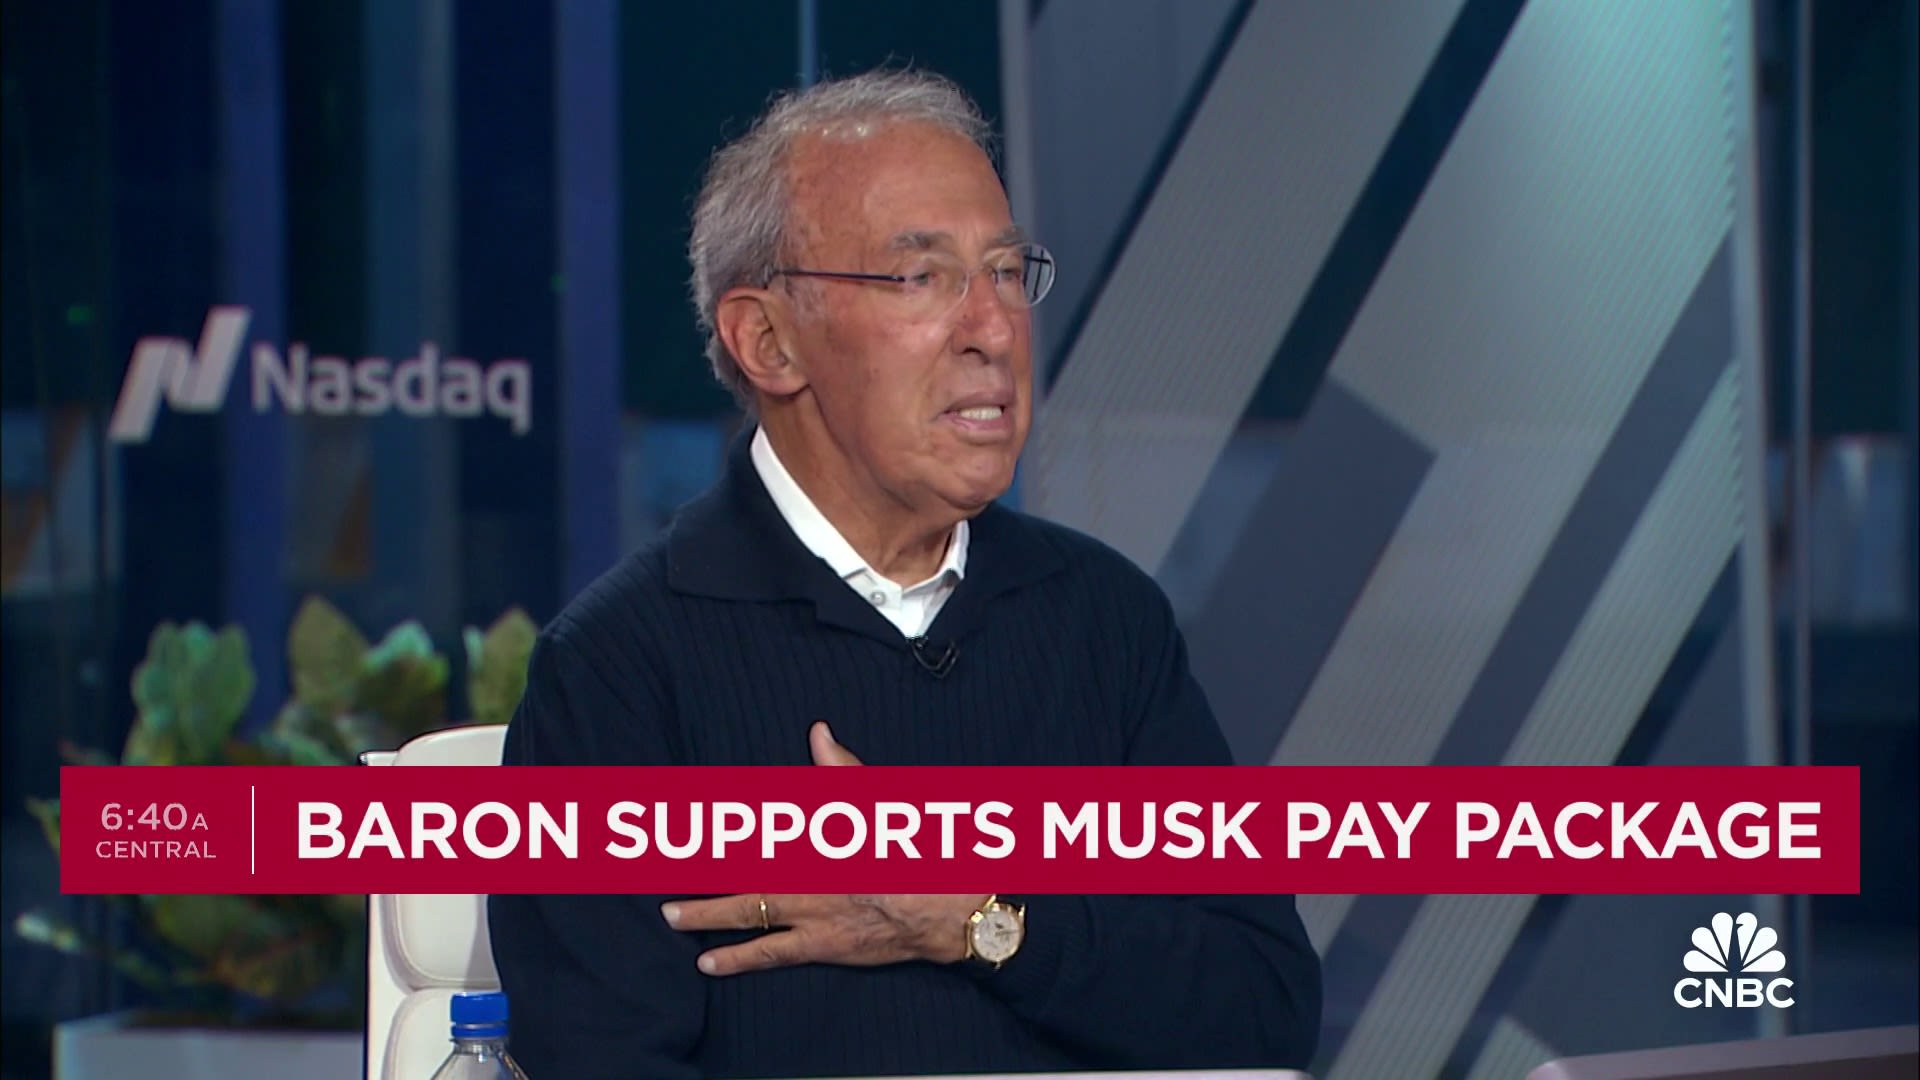 Ron Baron on supporting Elon Musk's pay package: He's created tremendous wealth for people